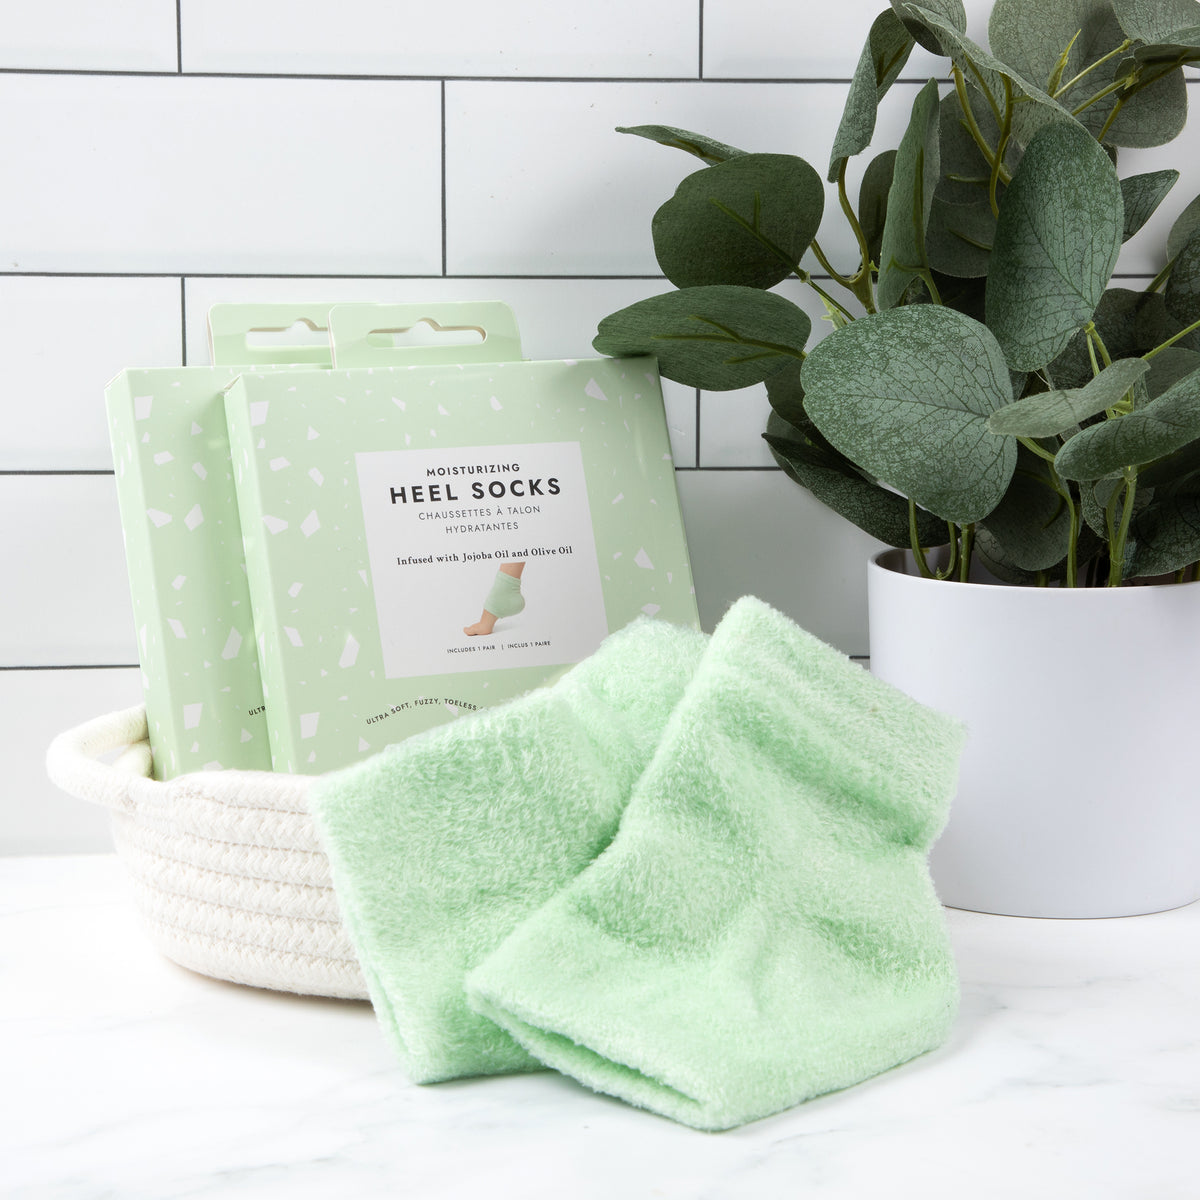 2 Moisturizing heel sock boxes in a basket on a white countertop with subway tiles behind it sitting next to a green plant and the socks sitting in front of them